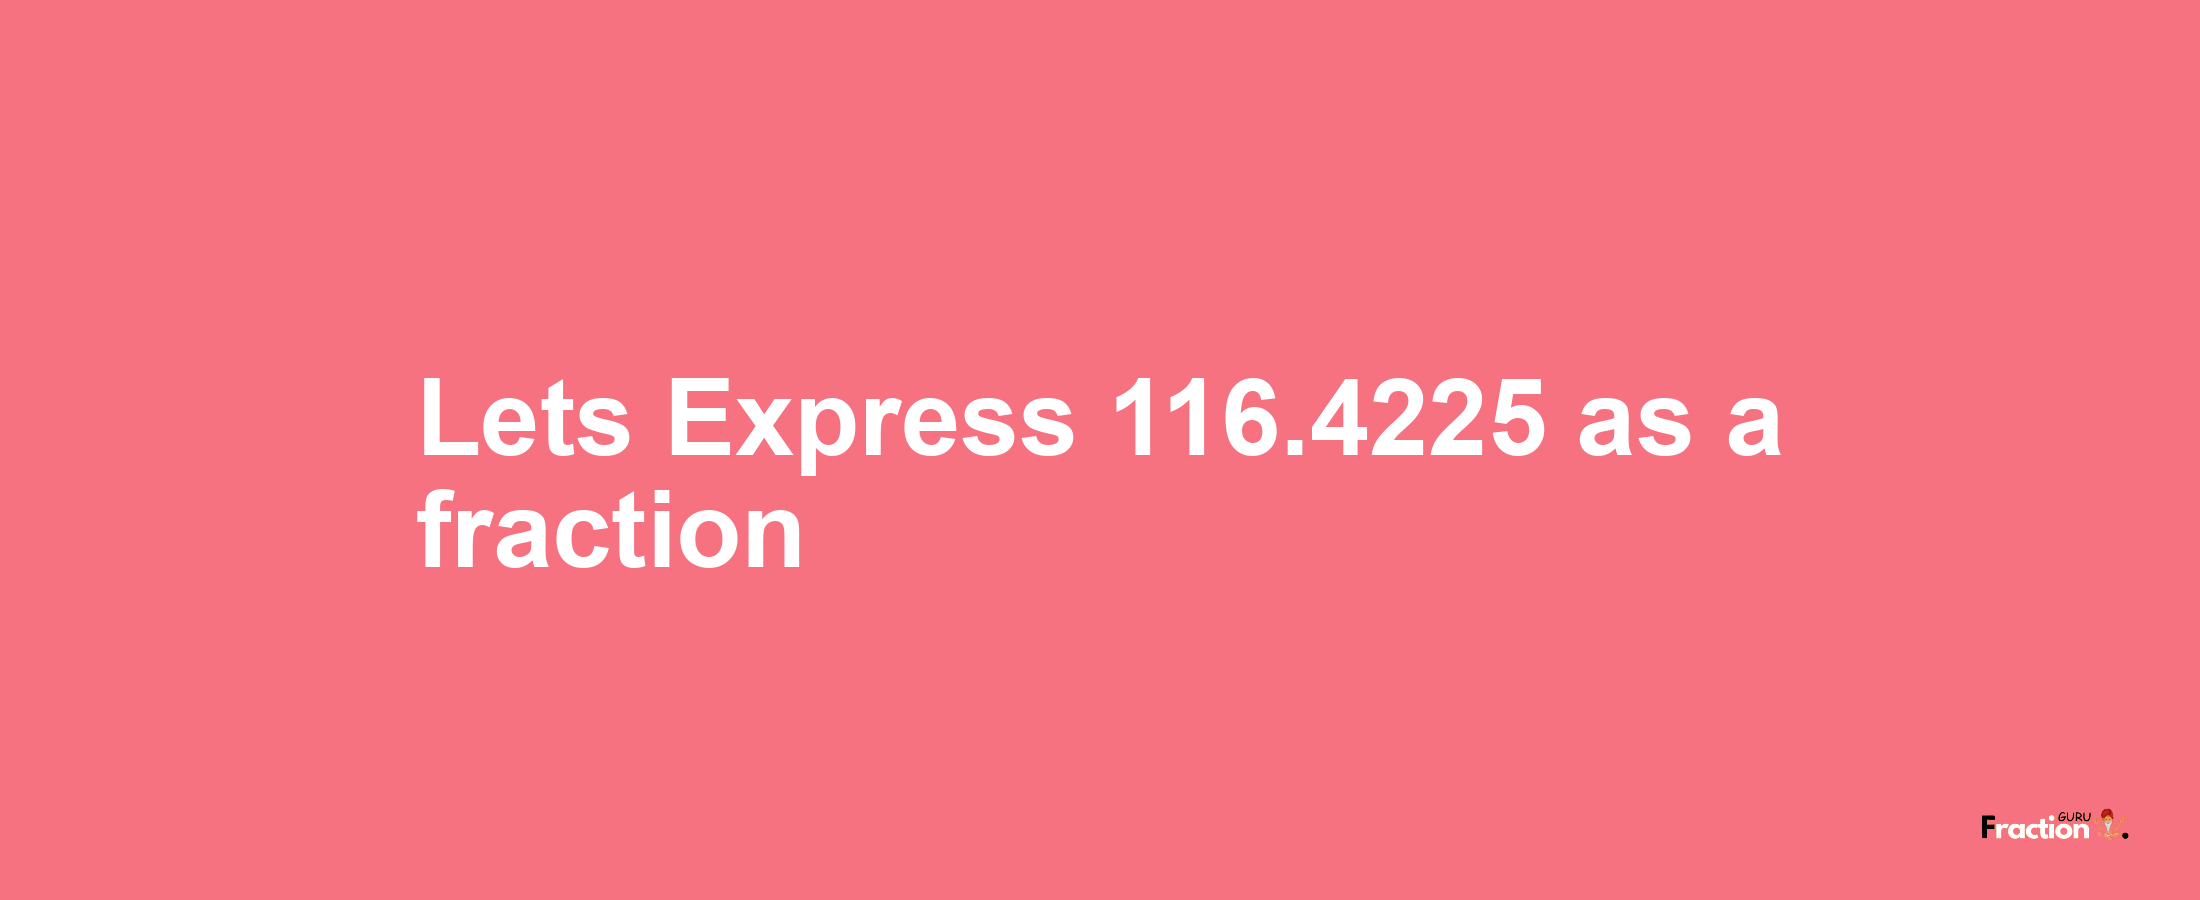 Lets Express 116.4225 as afraction